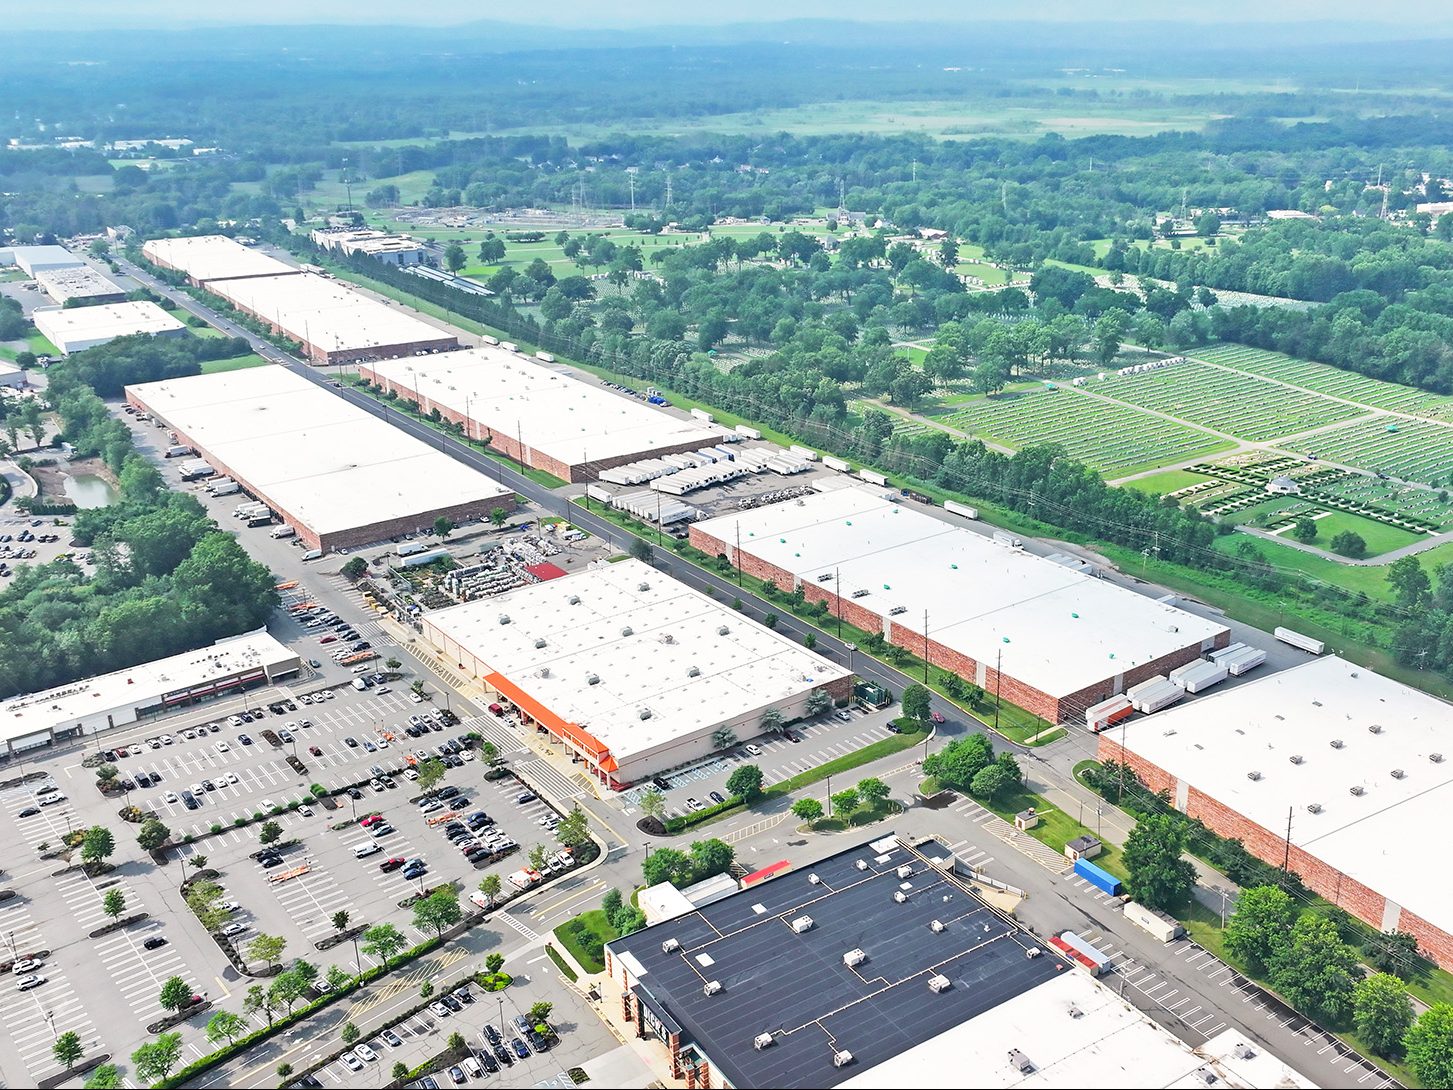 Aerial view of the East Hanover industrial portfolio